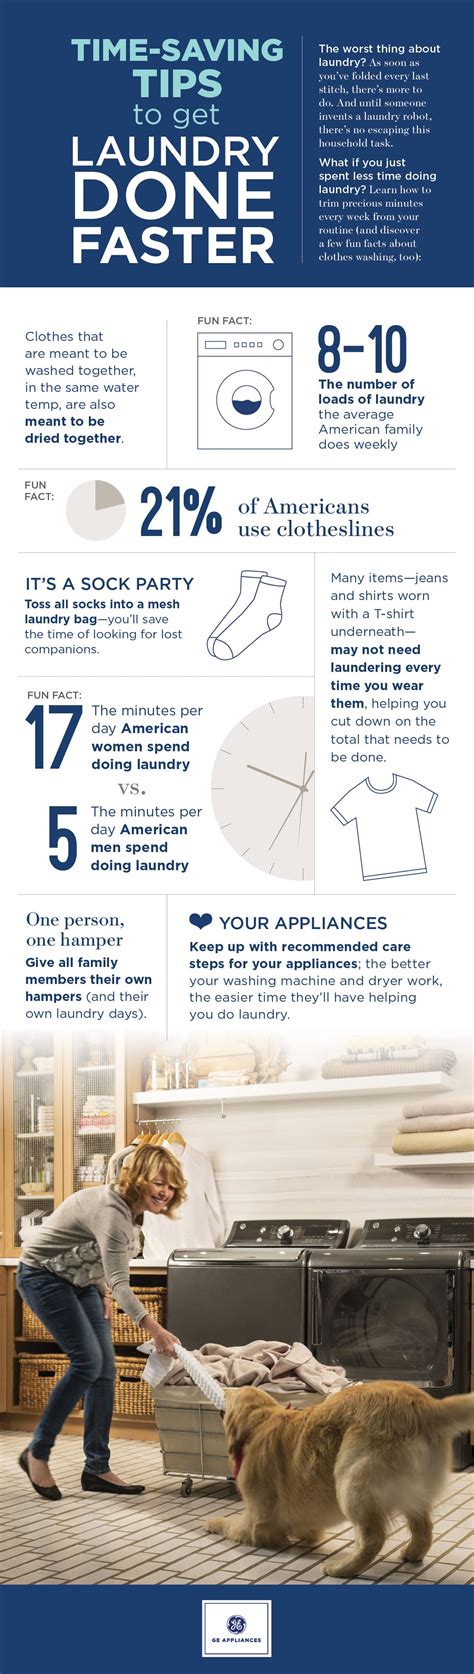 These Time Saving Laundry Hacks Will Help You Get Your Laundry Done